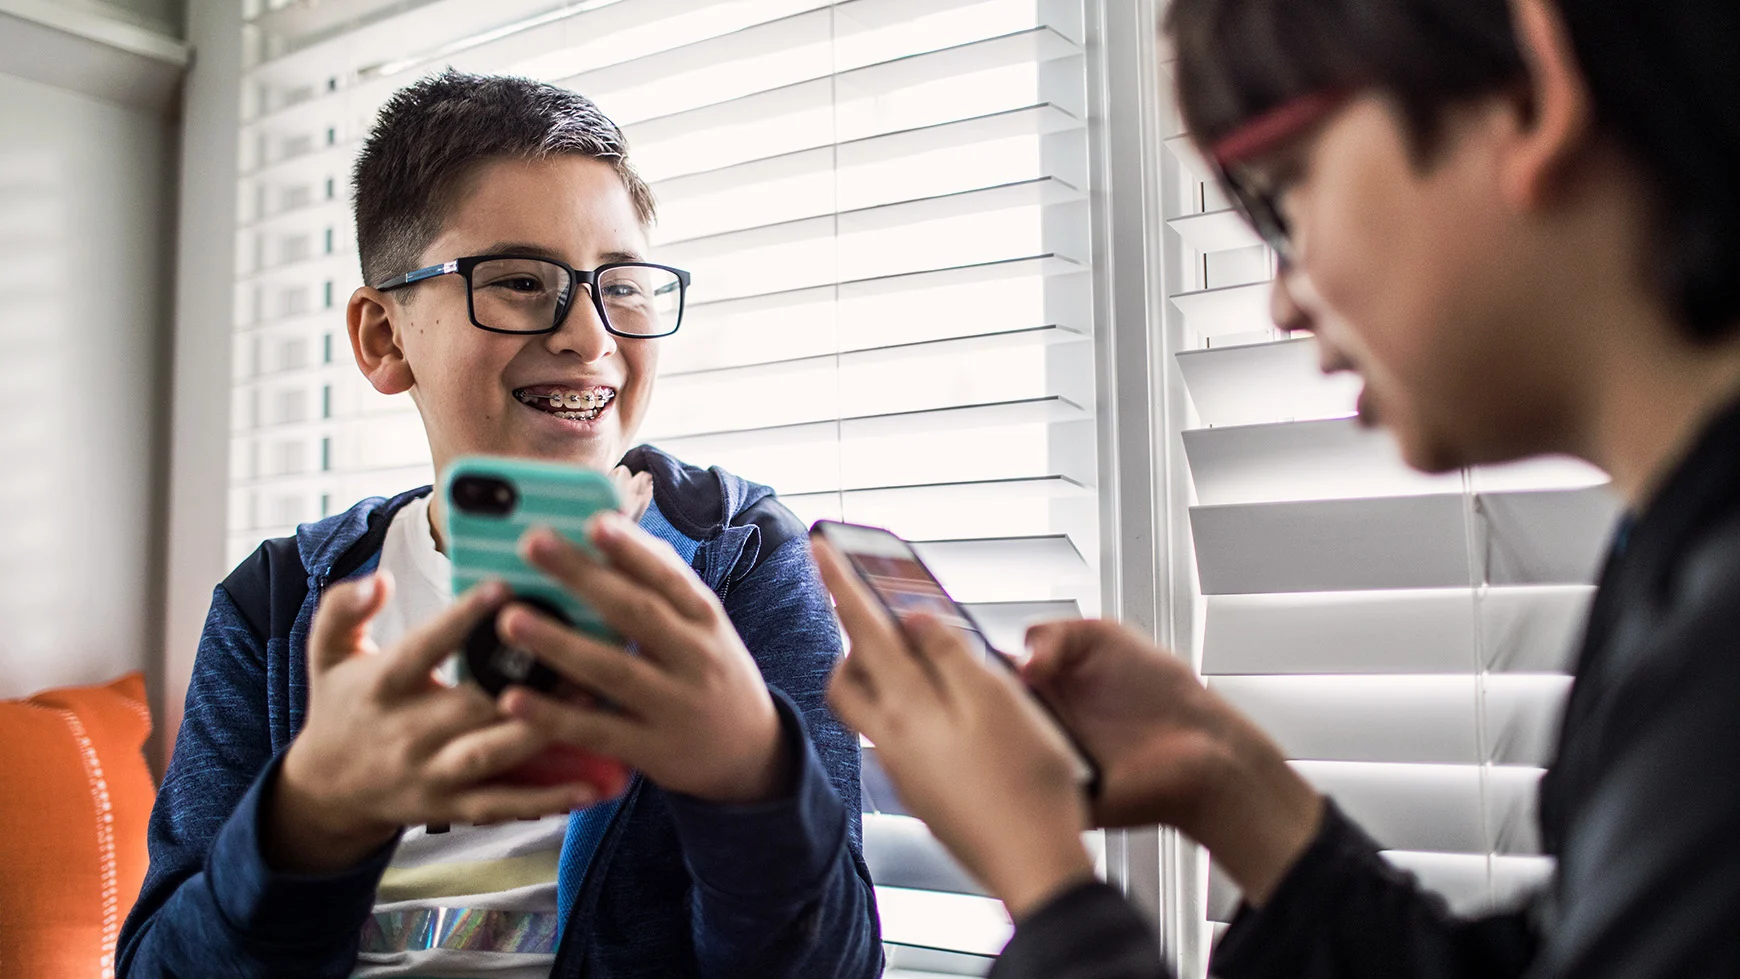 Two kids with glasses are smiling and playing mobile games together. They both hold cell phones. One of them also has braces. 